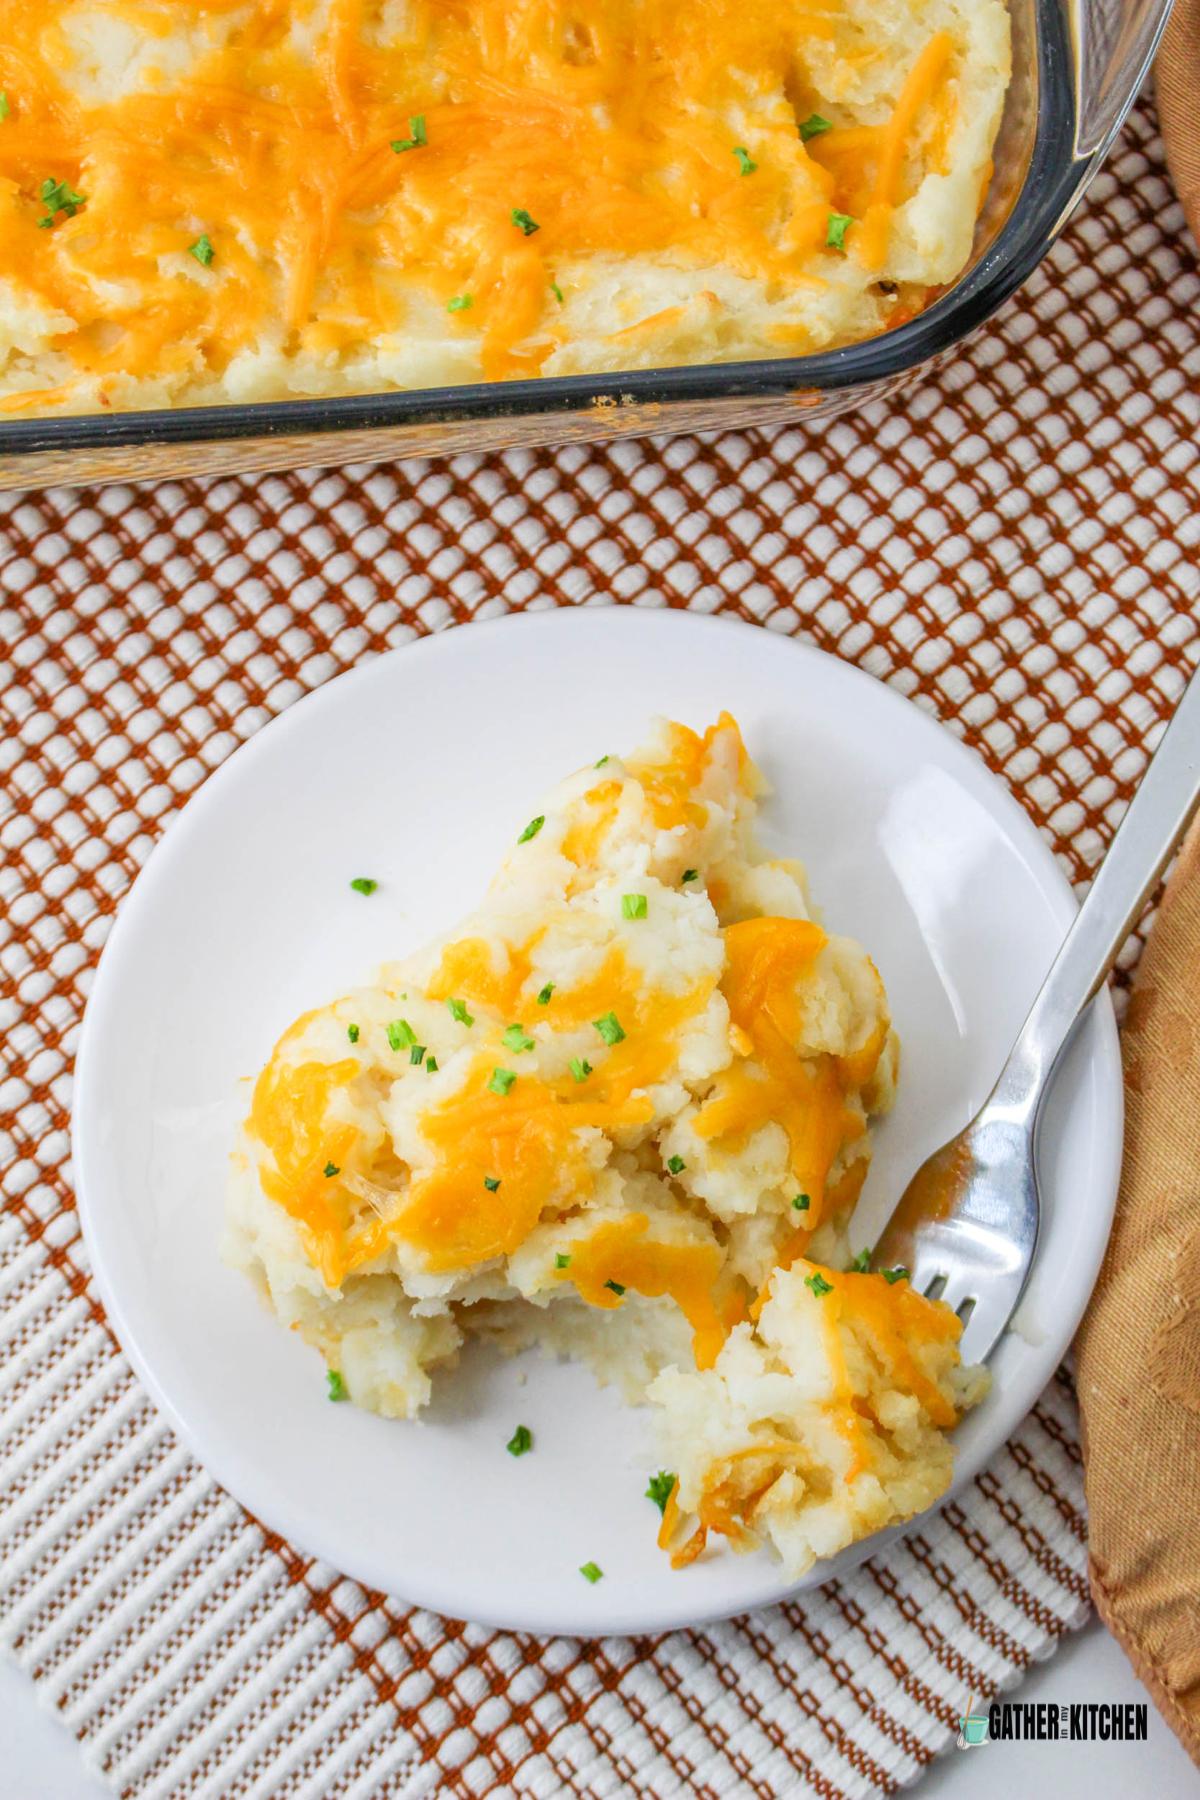 Top view of a plate of mashed potato casserole.